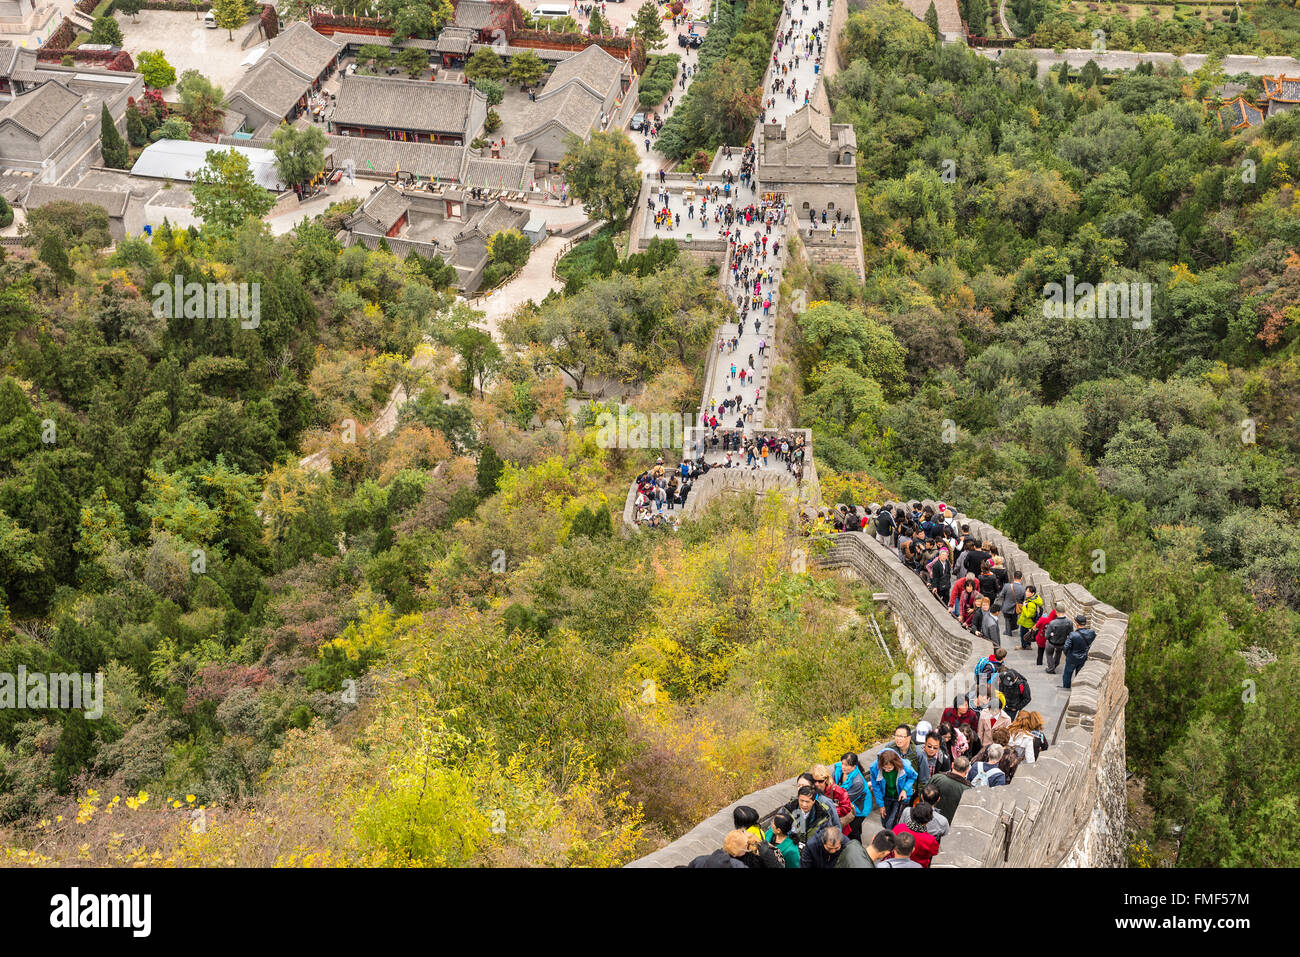 A view of the Great Wall in Beijing, China. The Visitors are both locals and foreigners. Stock Photo